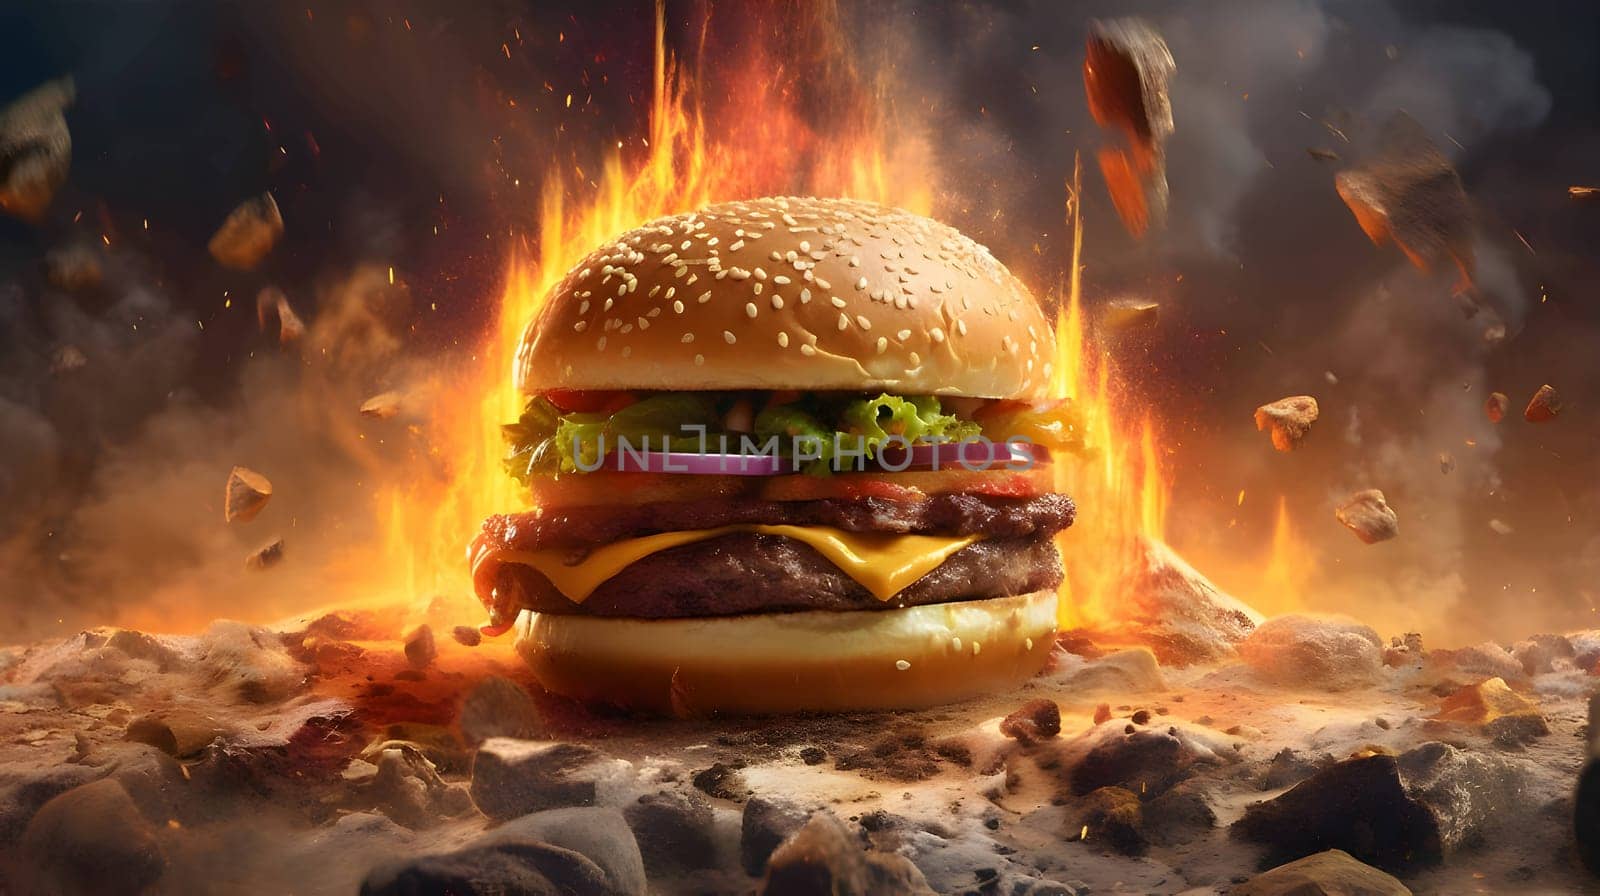 A sizzling burger with crisp lettuce, melted cheese, and savory onions, guaranteed to ignite your taste buds. An ideal choice for captivating advertisements.